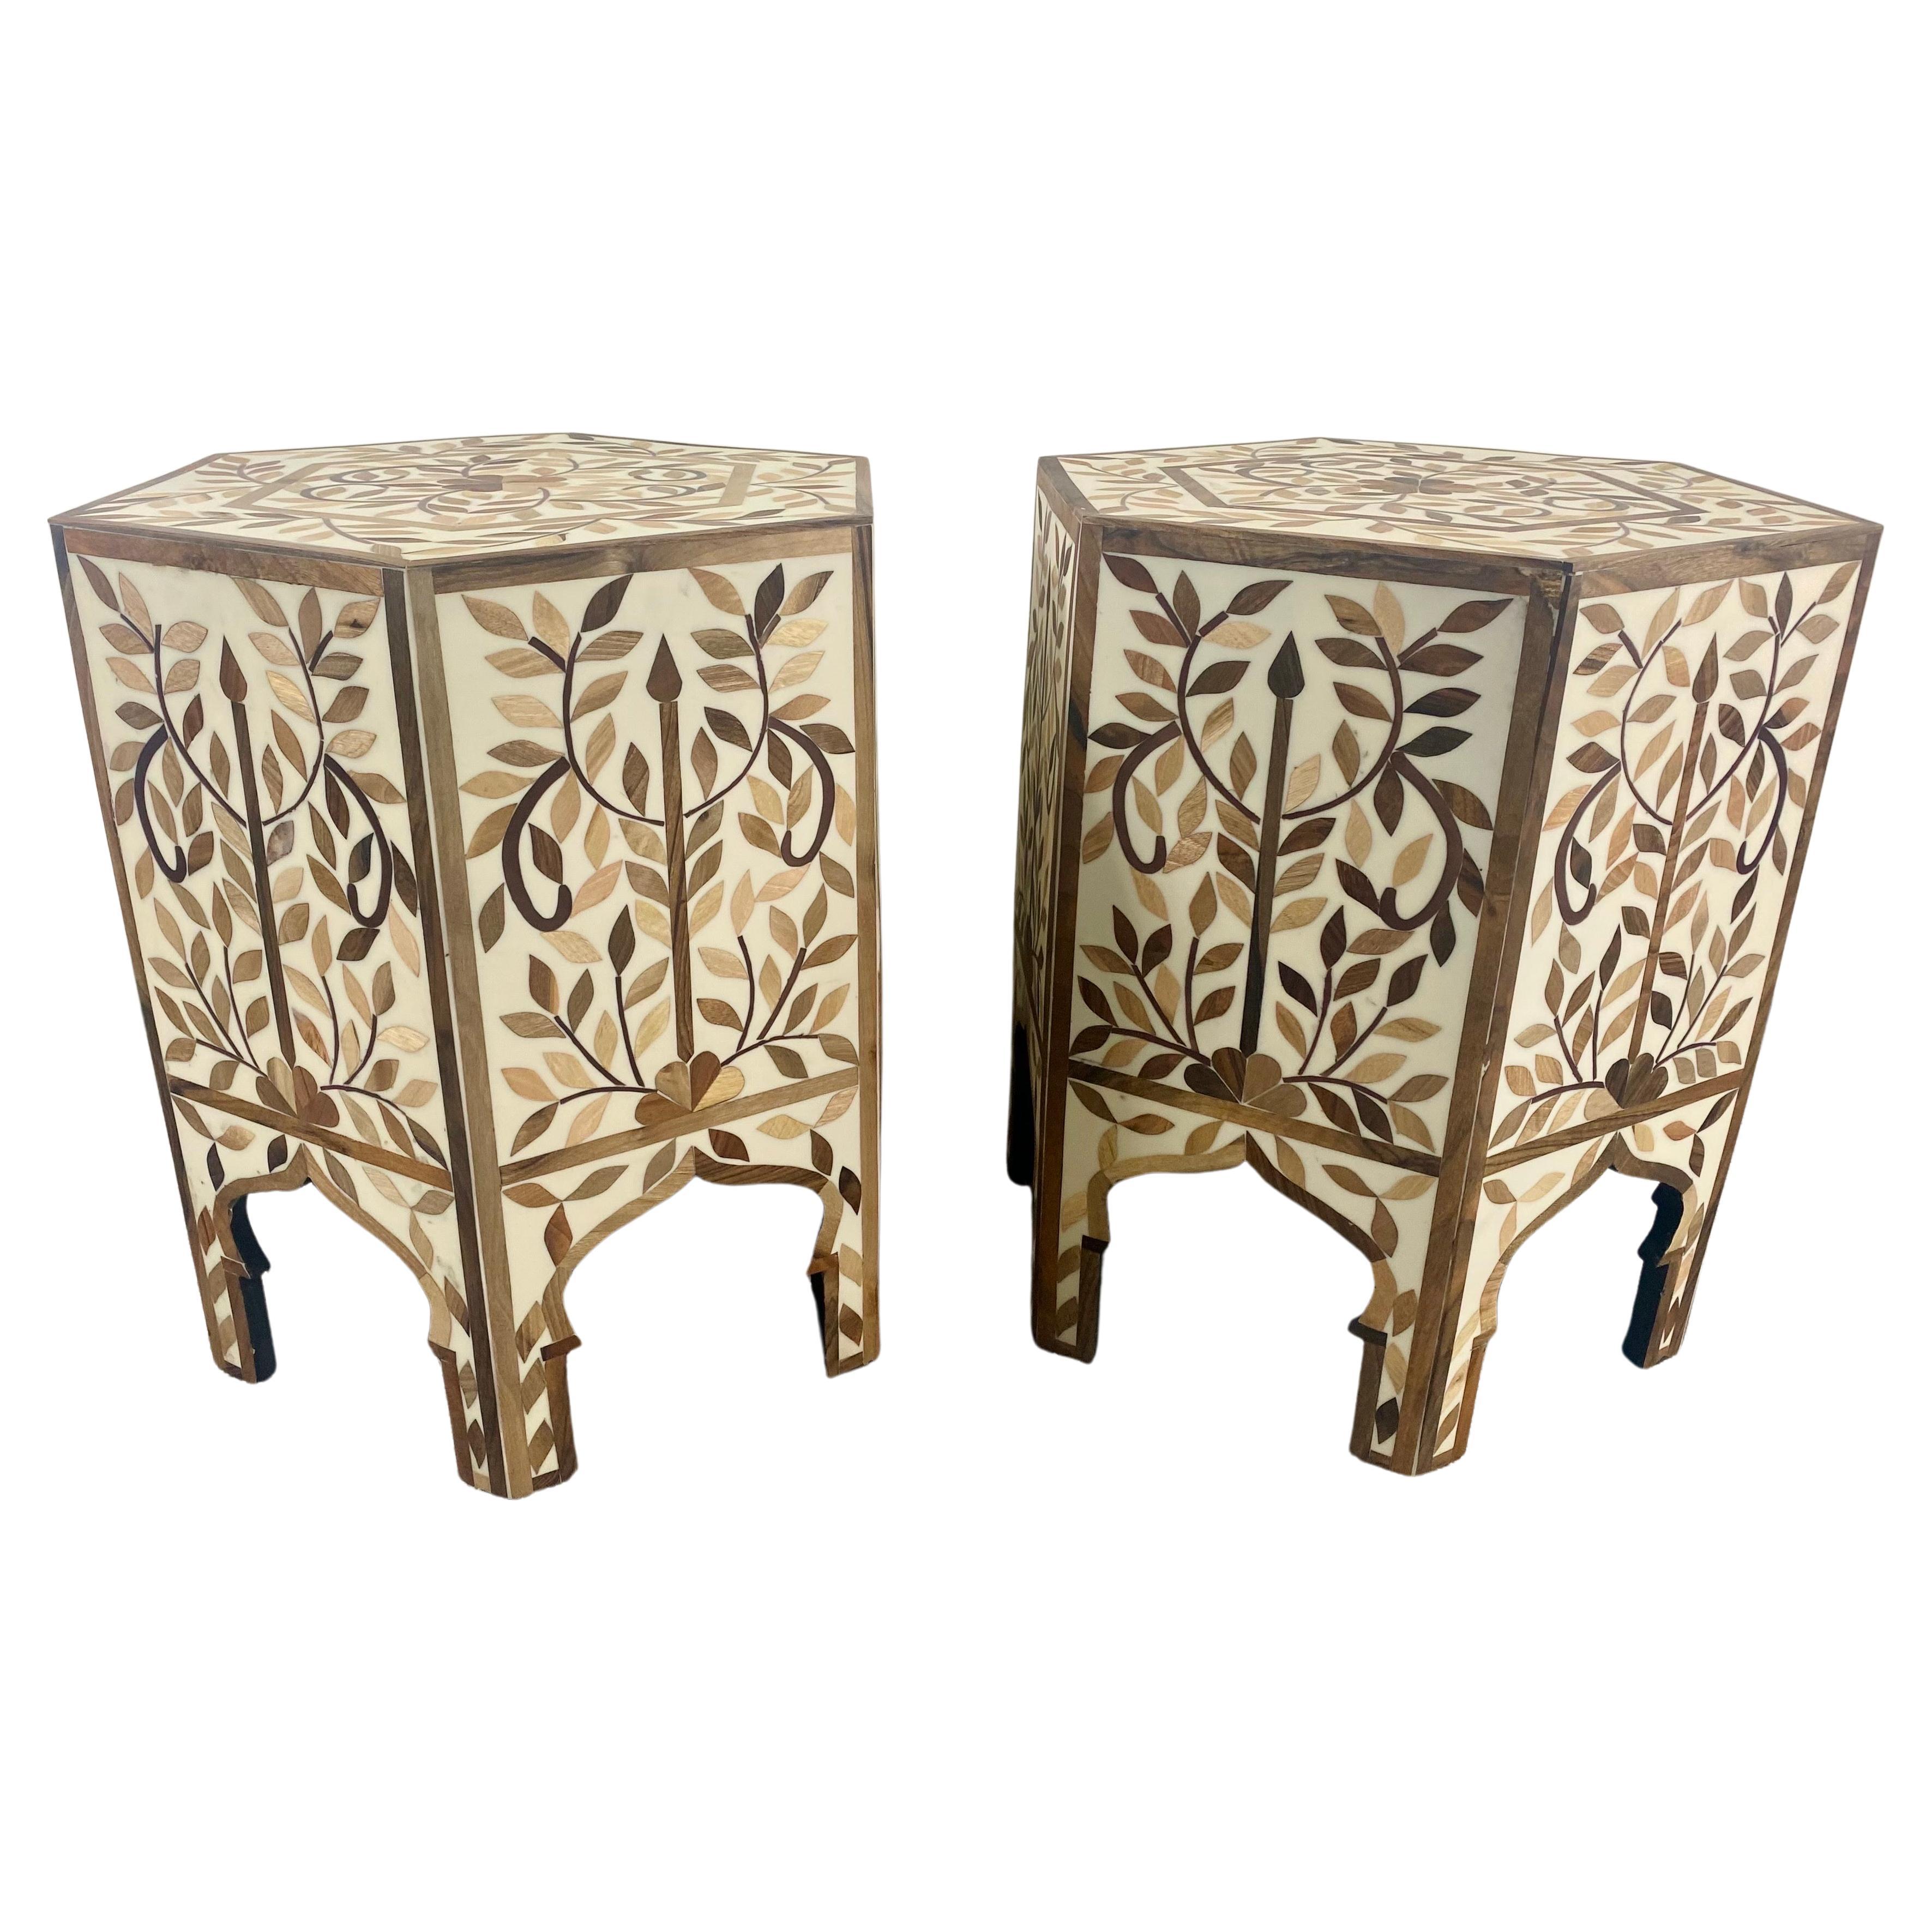 An exquisite pair of Moroccan boho chic side or end table featuring an hexagonal shape. The handmade tables are finely decorated in leaves Pattern and beautiful arches, a staple of the Moorish timeless architecture and design. handmade of resin in